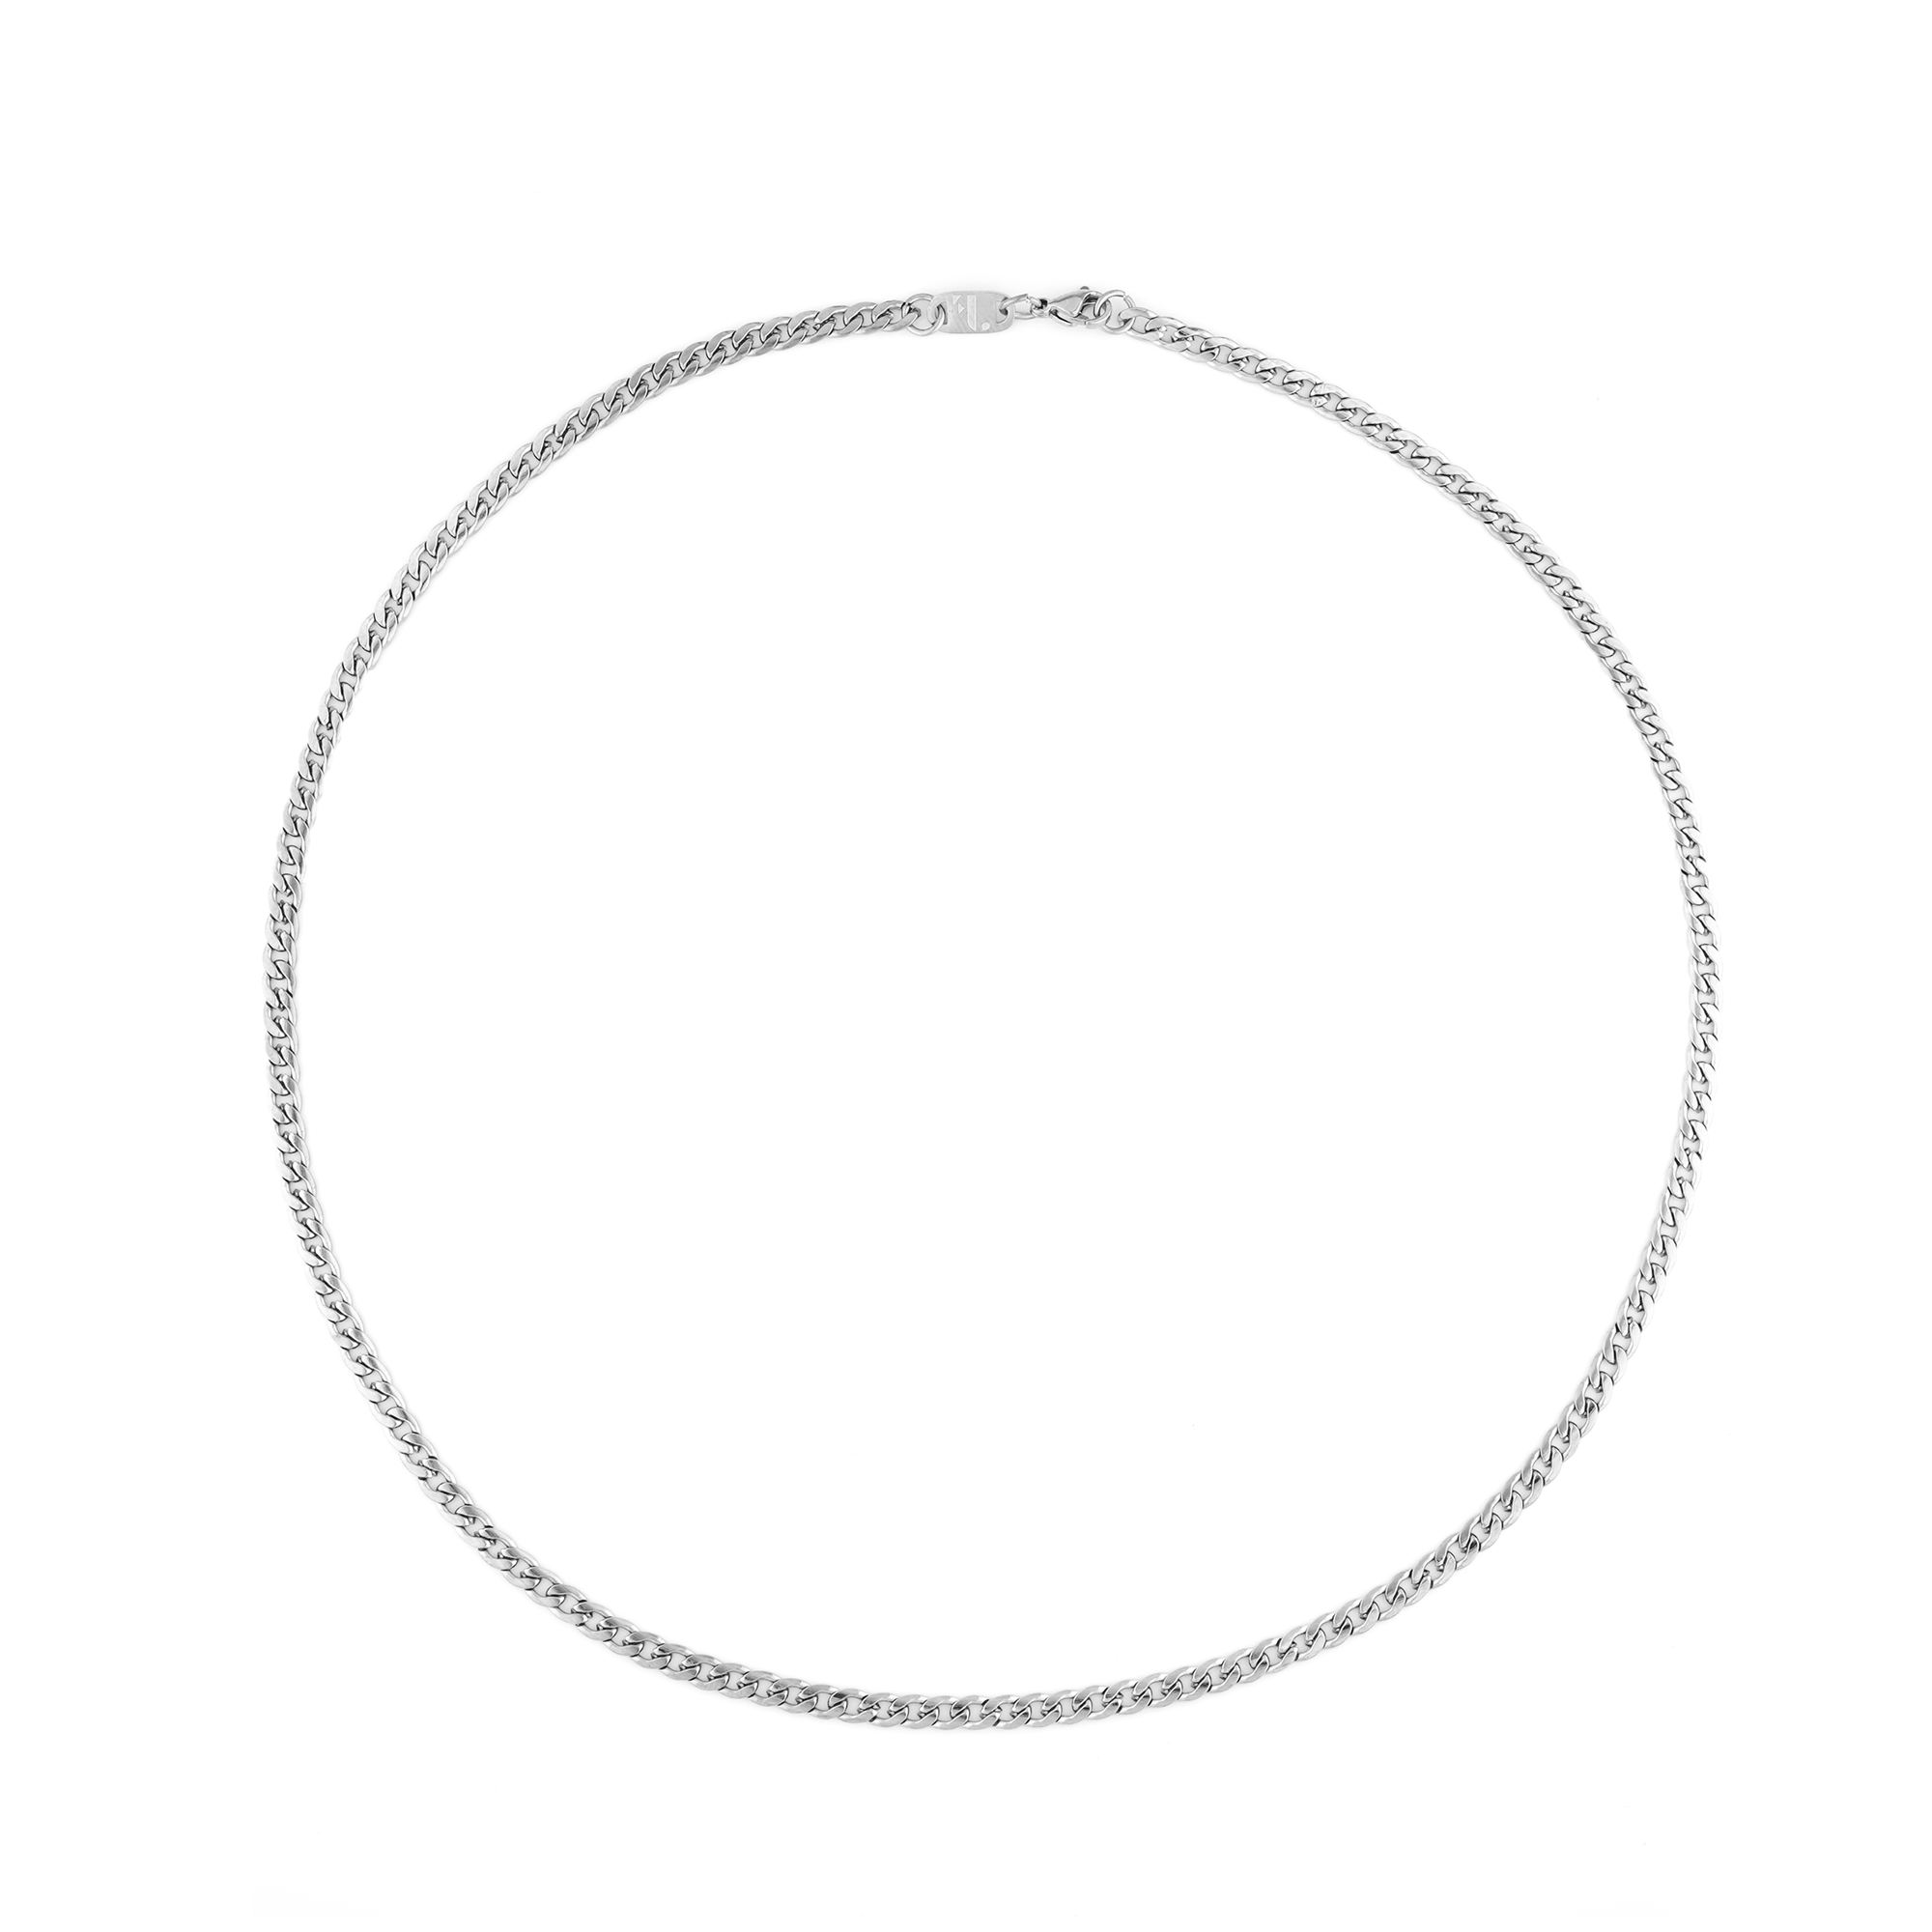 Mirik men's necklace by Five Jwlry, designed with a 4mm flat wide woven Cuban link chain in a silver hue, made from water-resistant 316L stainless steel. Offered in sizes 45cm, 50cm, and 55cm. Hypoallergenic and backed by a 2-year warranty.